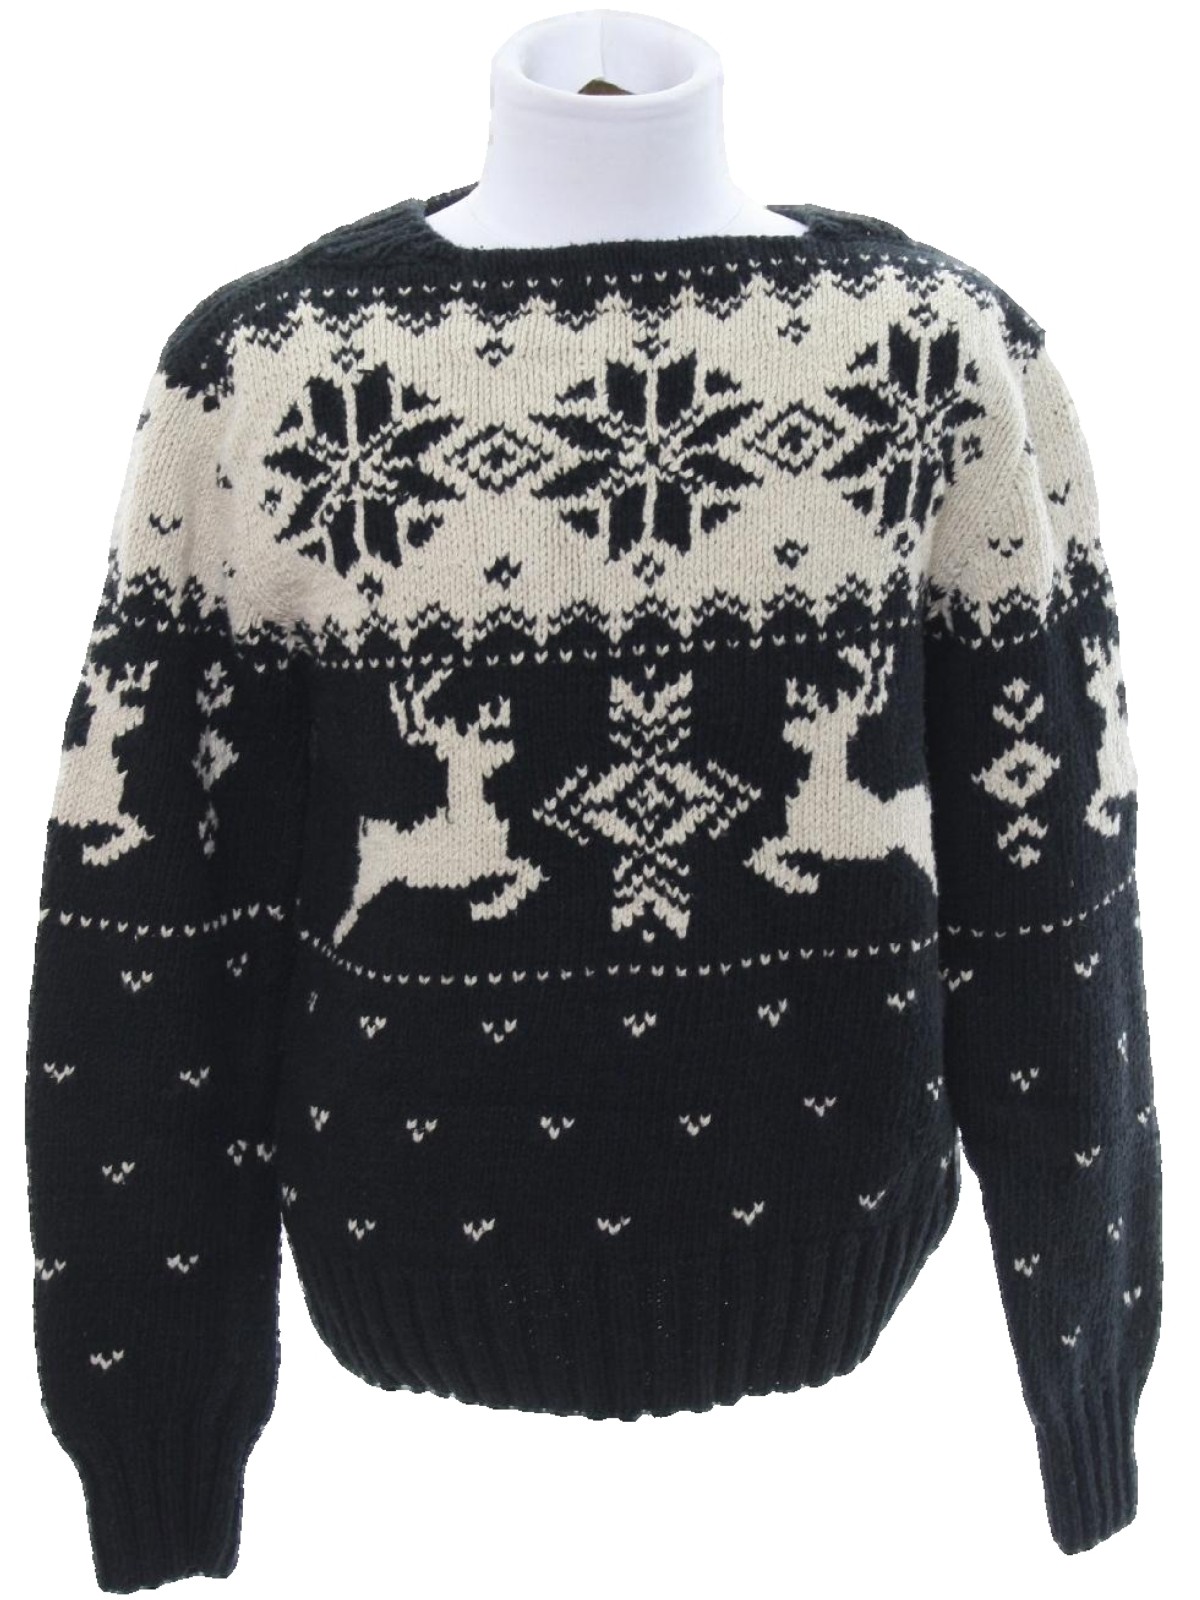 Childs Ugly Christmas Snowflake Reindeer Sweater: -Polo by Ralph Lauren-  Unisex/Childs black background cotton pullover longsleeve Ugly Christmas  Sweater with round neckline. Featuring reindeer, and snowflakes. Reindeer  and snowflakes on back. Some